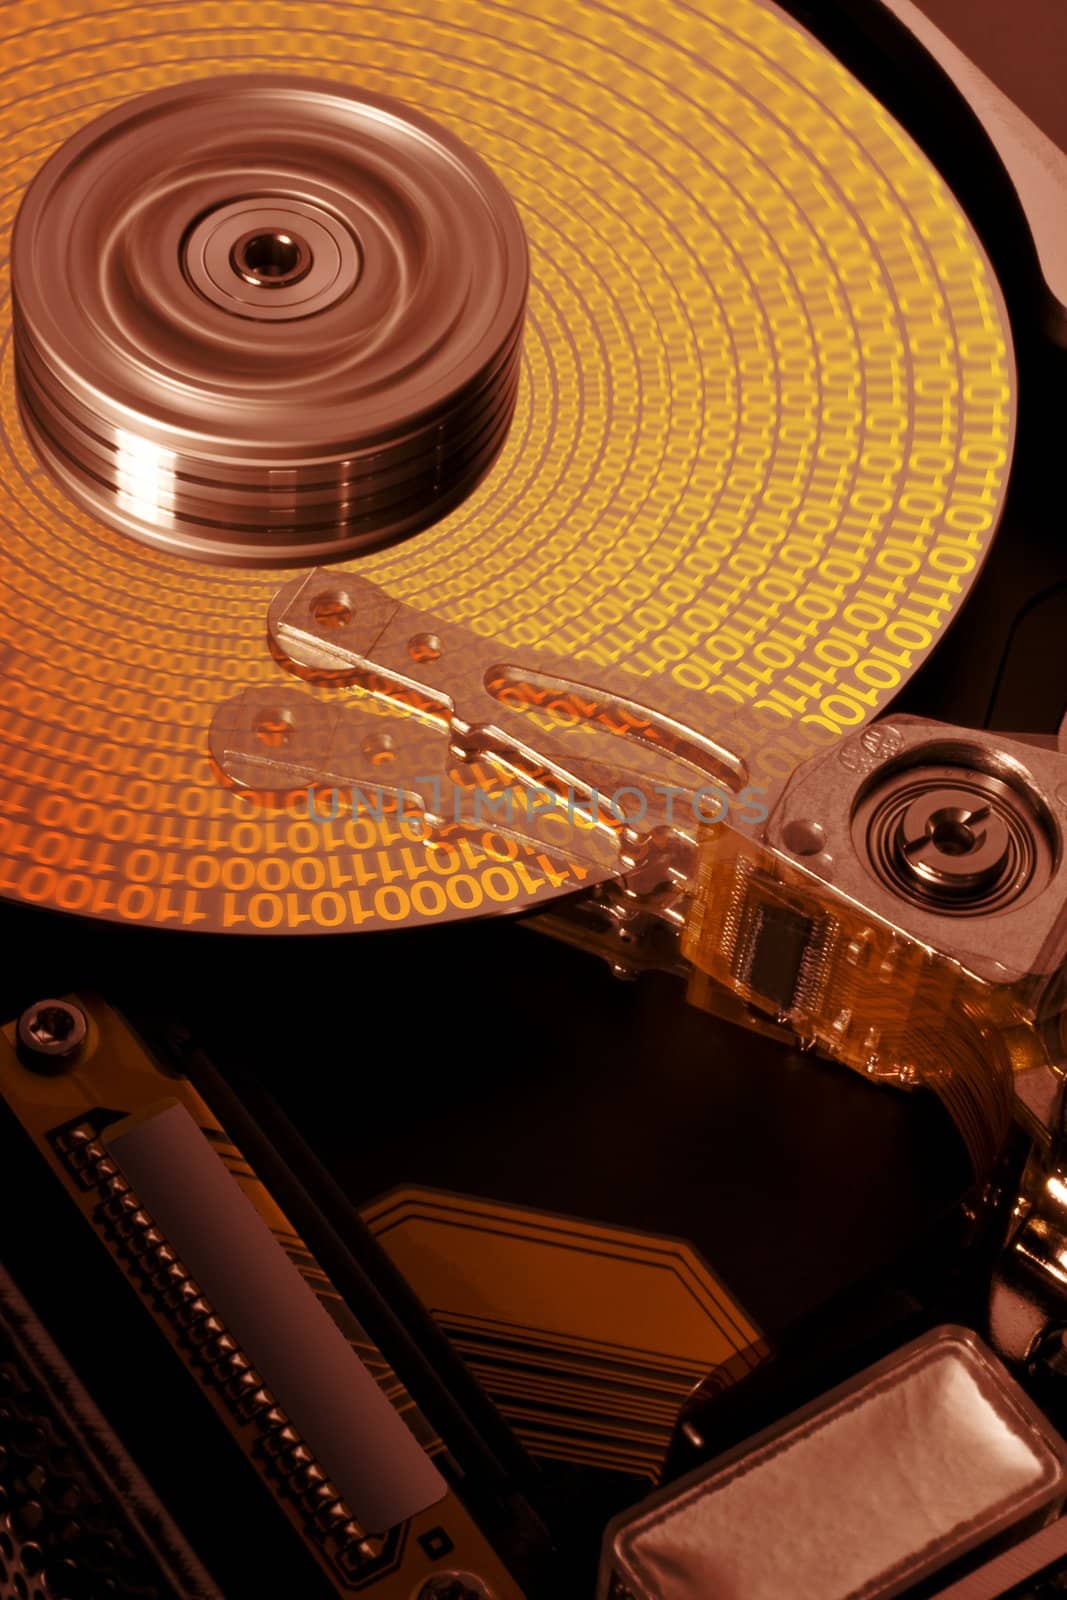 open hard disk with symbolized data by gewoldi